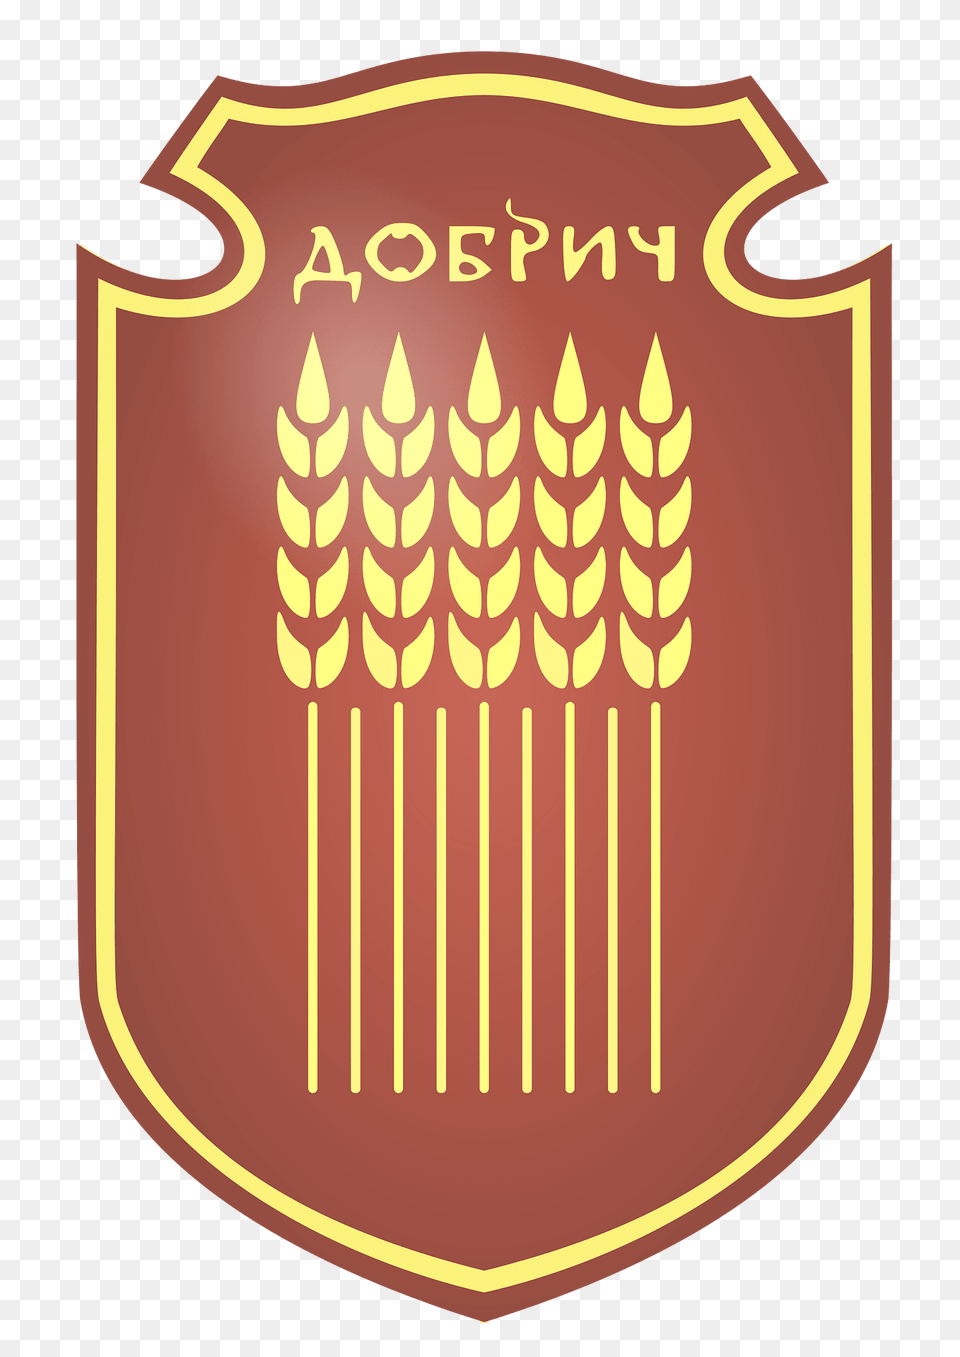 Dobrich Coat Of Arms Clipart, Armor, Shield, Logo Png